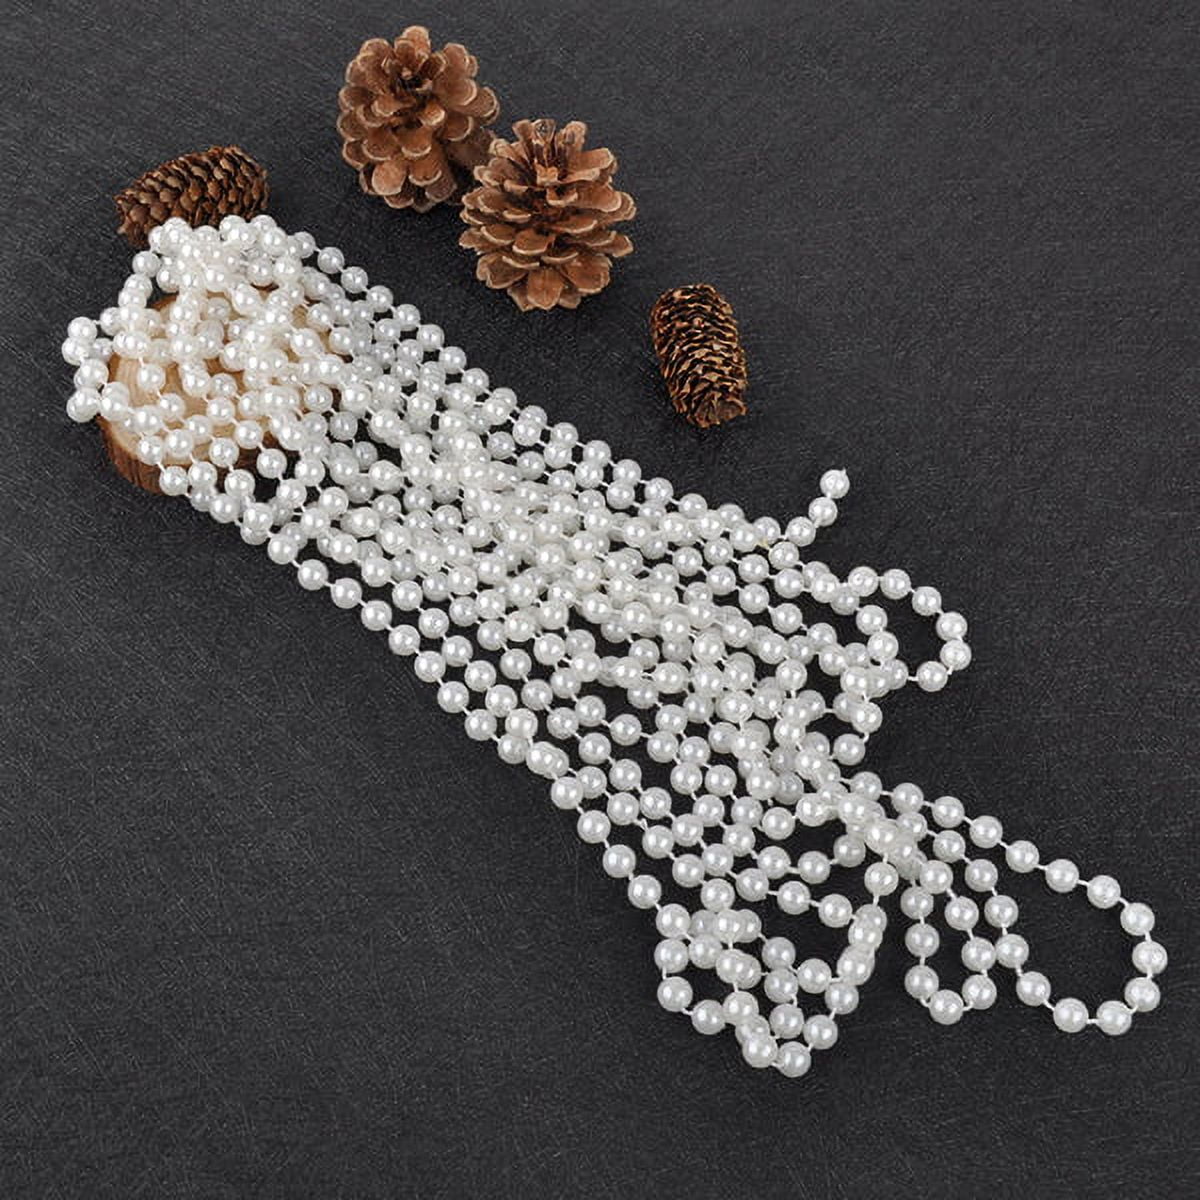 EXCEART 100 Pcs Pearl Accessories Di Sole Earring Craft Beads Craft Pearls  Fake Pearl Pearls Beads Bangle Charms Charm Necklace Jewelry Charms Bulk